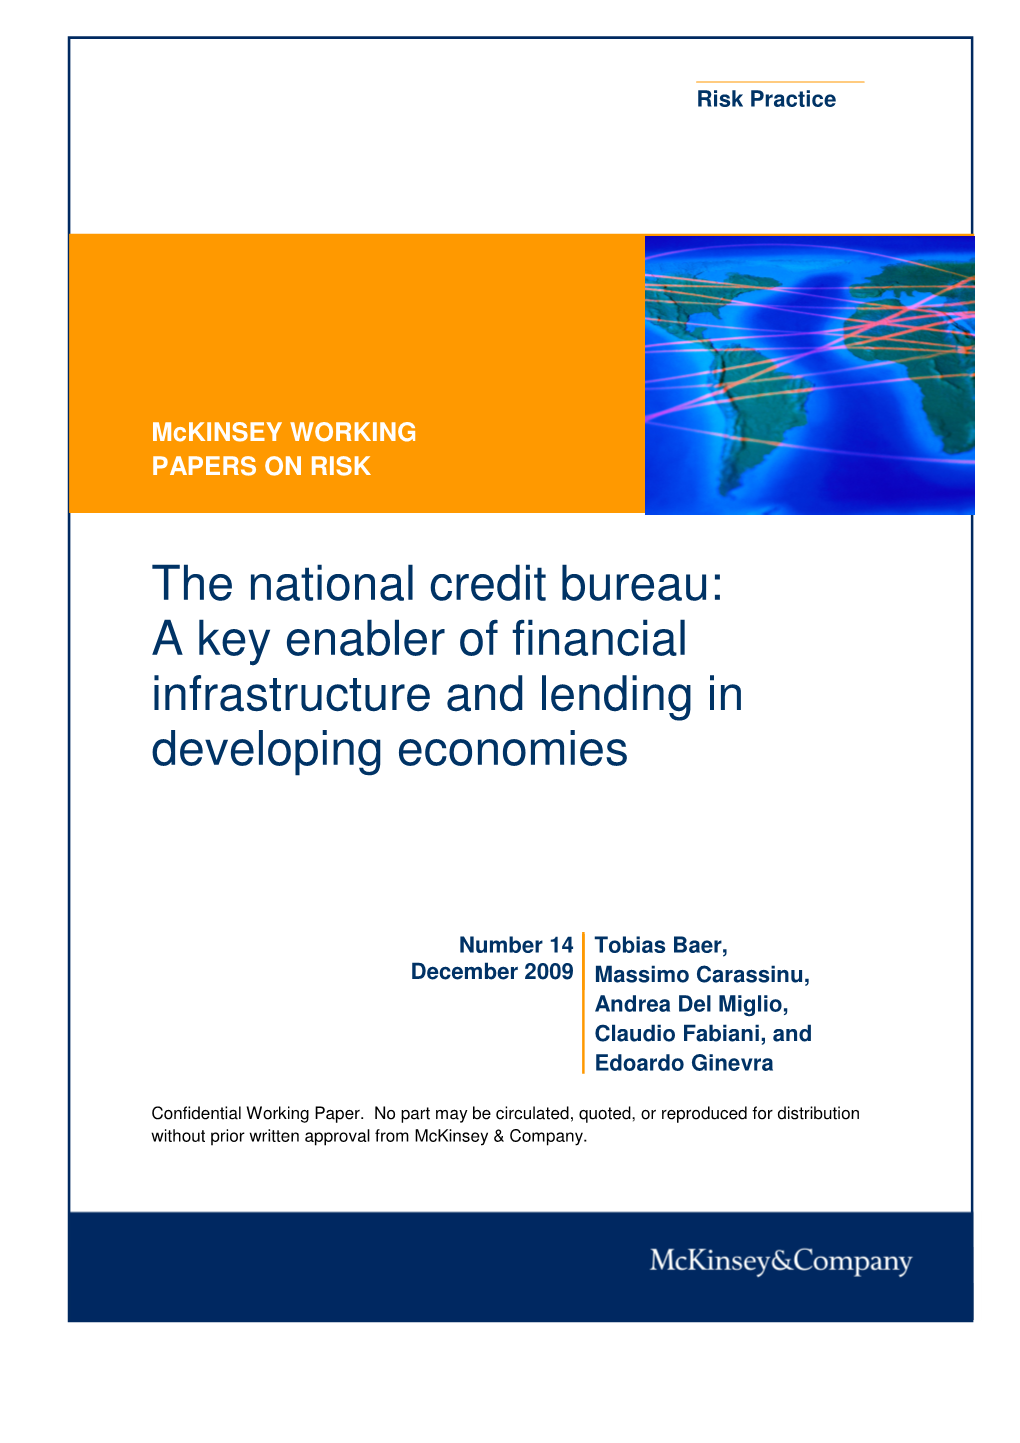 The National Credit Bureau: a Key Enabler of Financial Infrastructure and Lending in Developing Economies